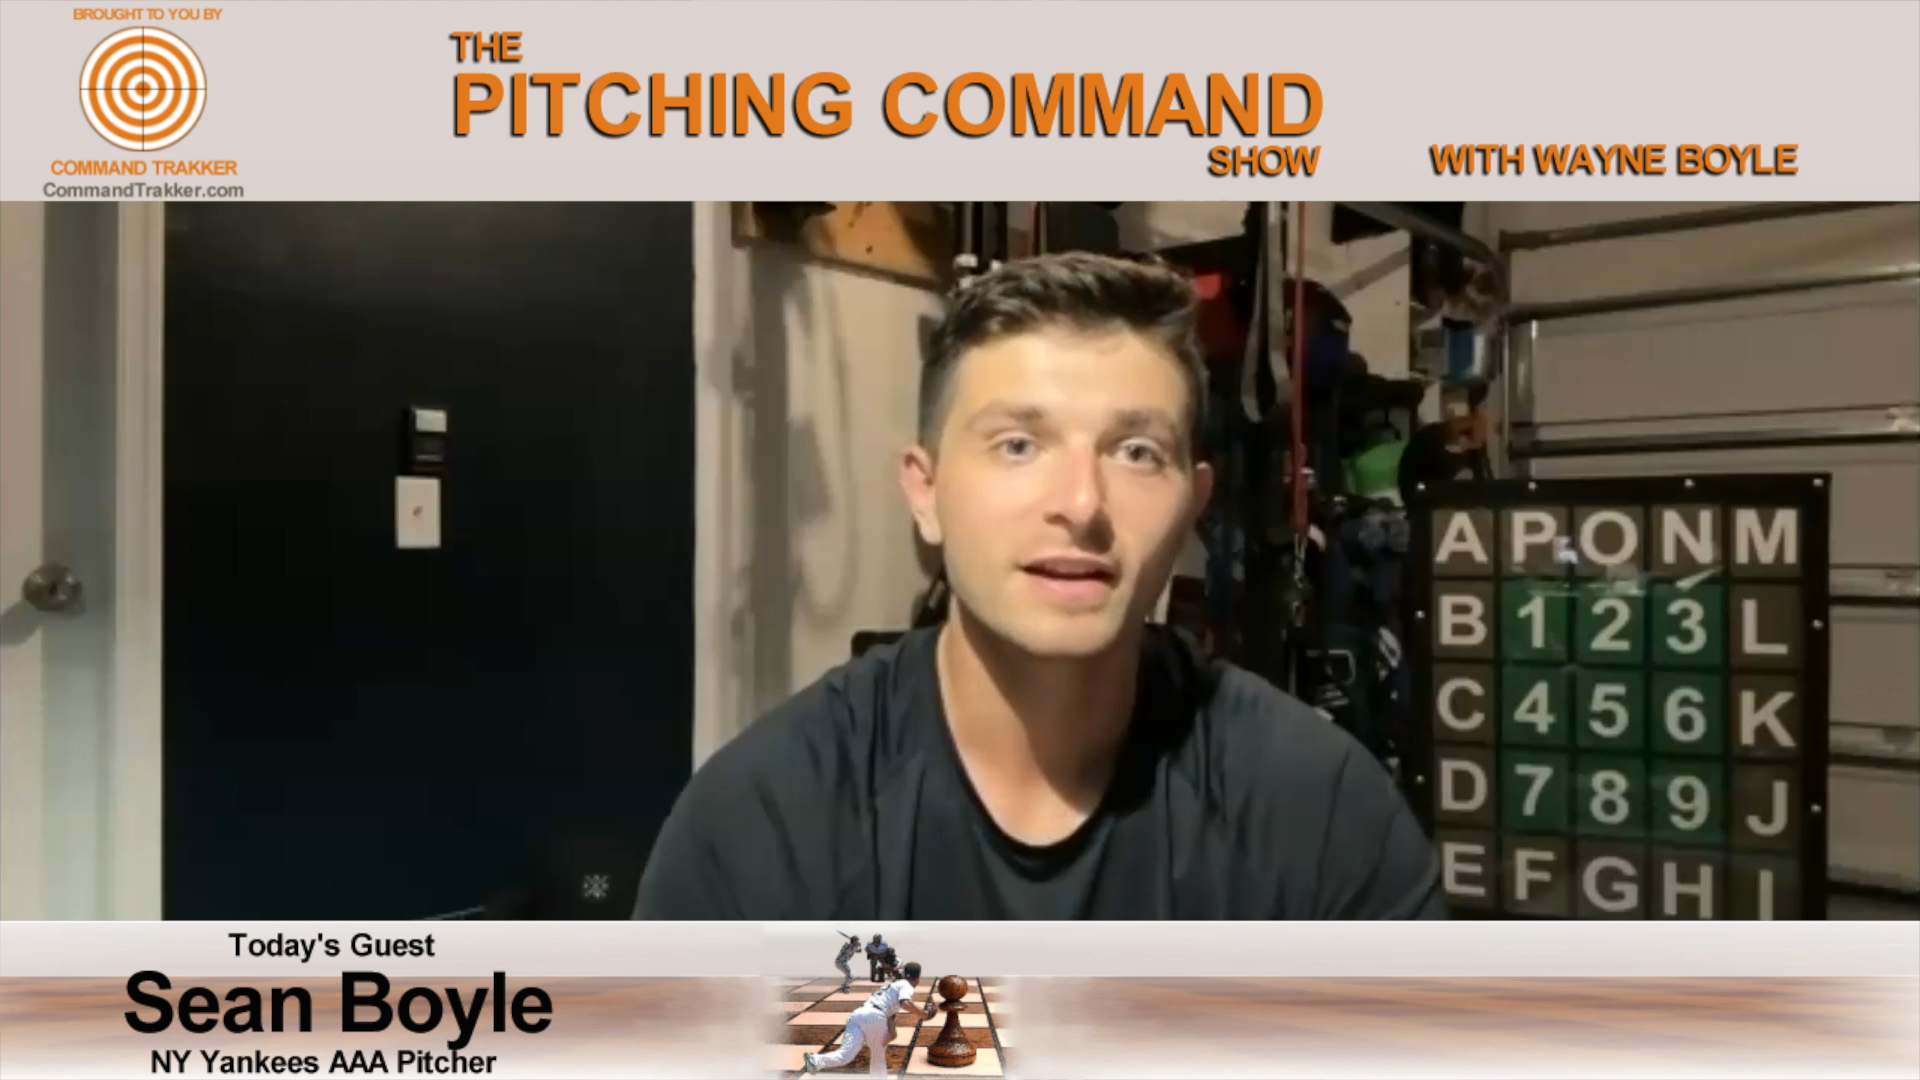 The Pitching Command Show